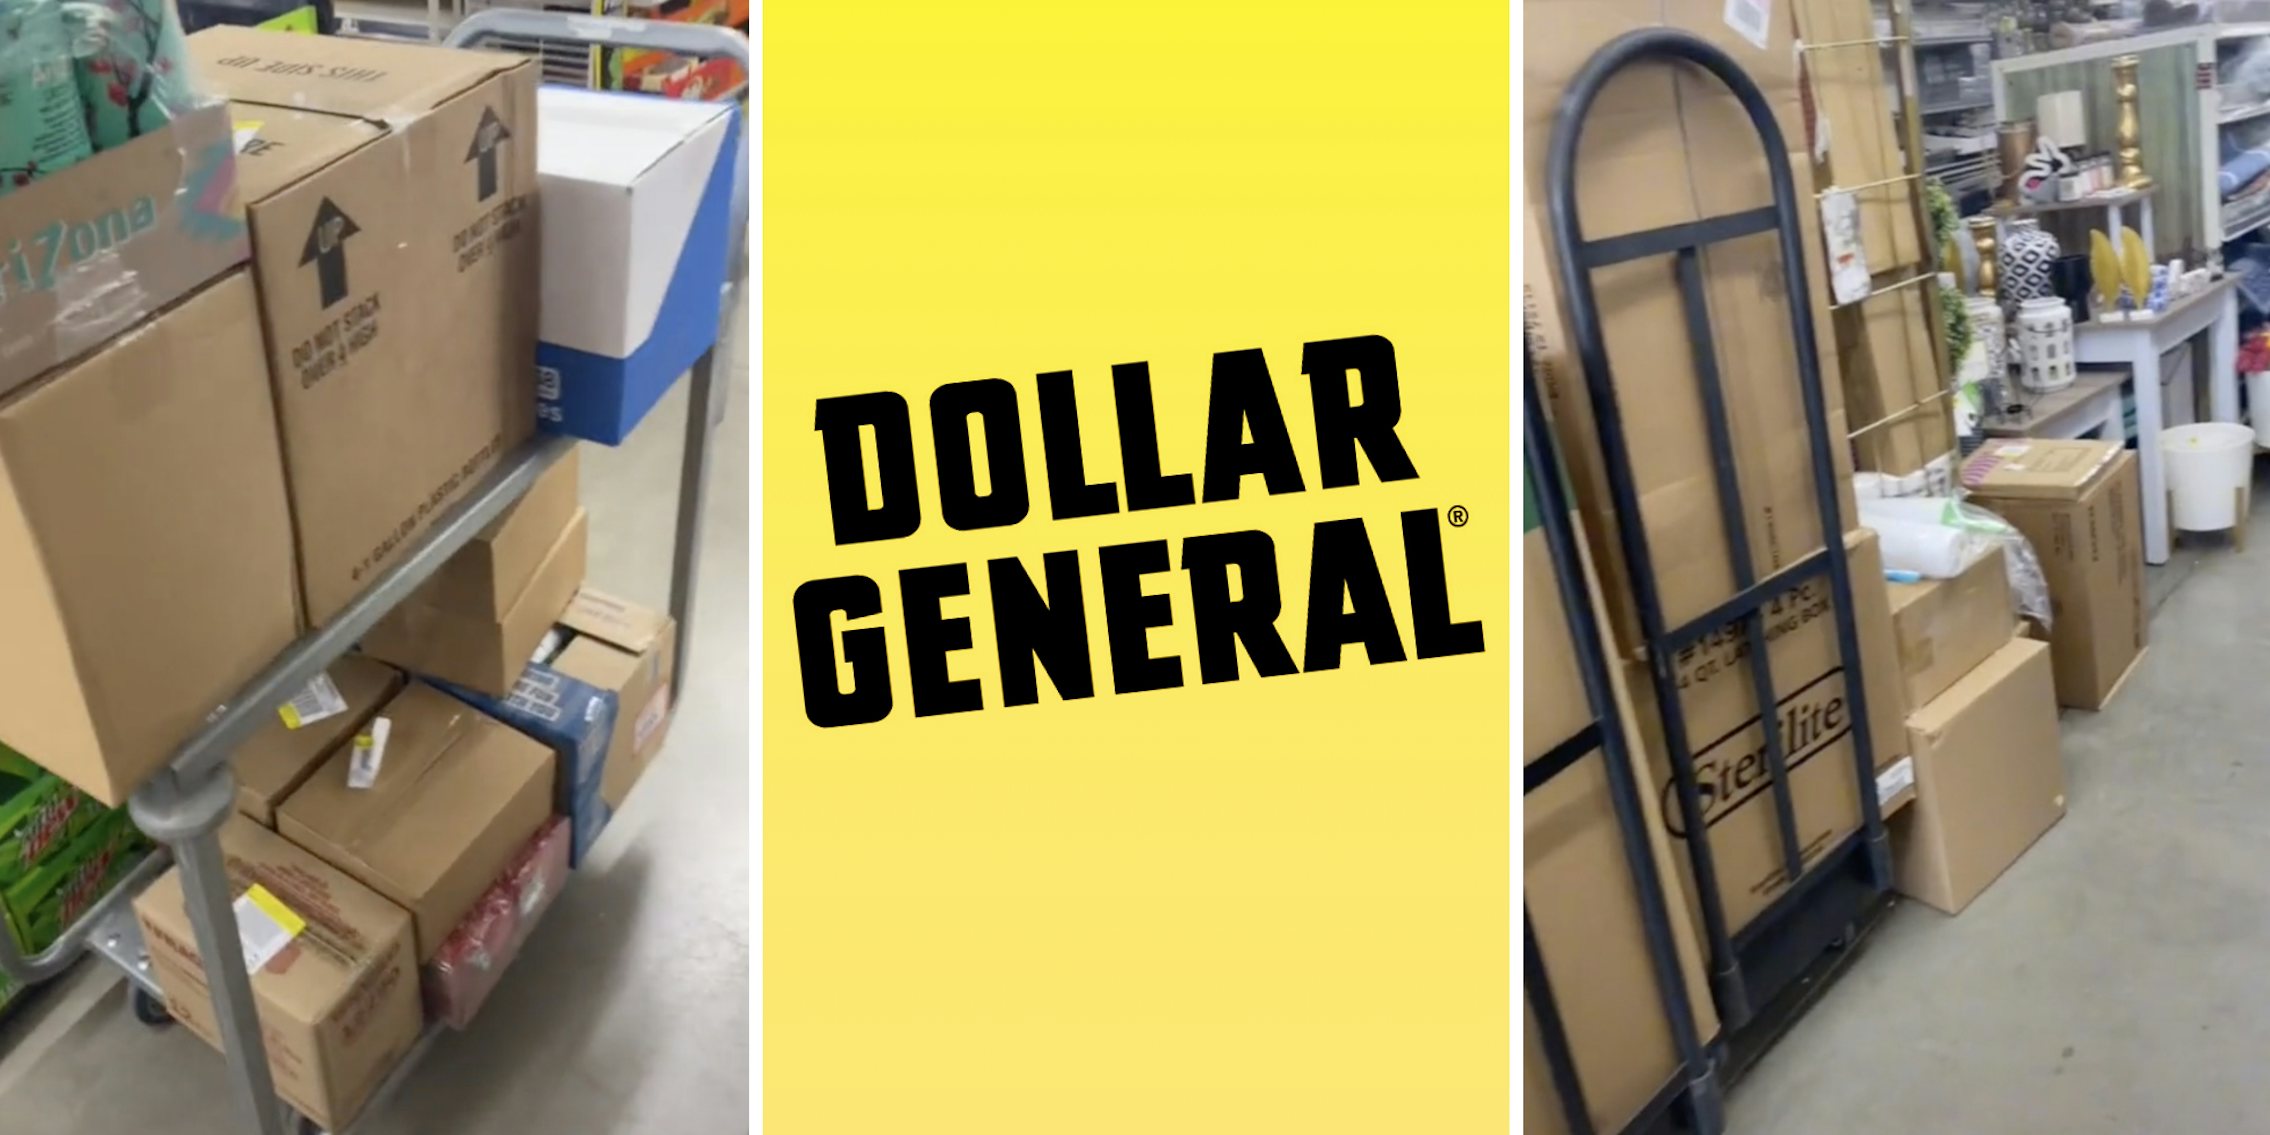 stacked shipping boxes in a department store (l) dollar general logo (c) even more stacked shipping boxes in a department store (r)